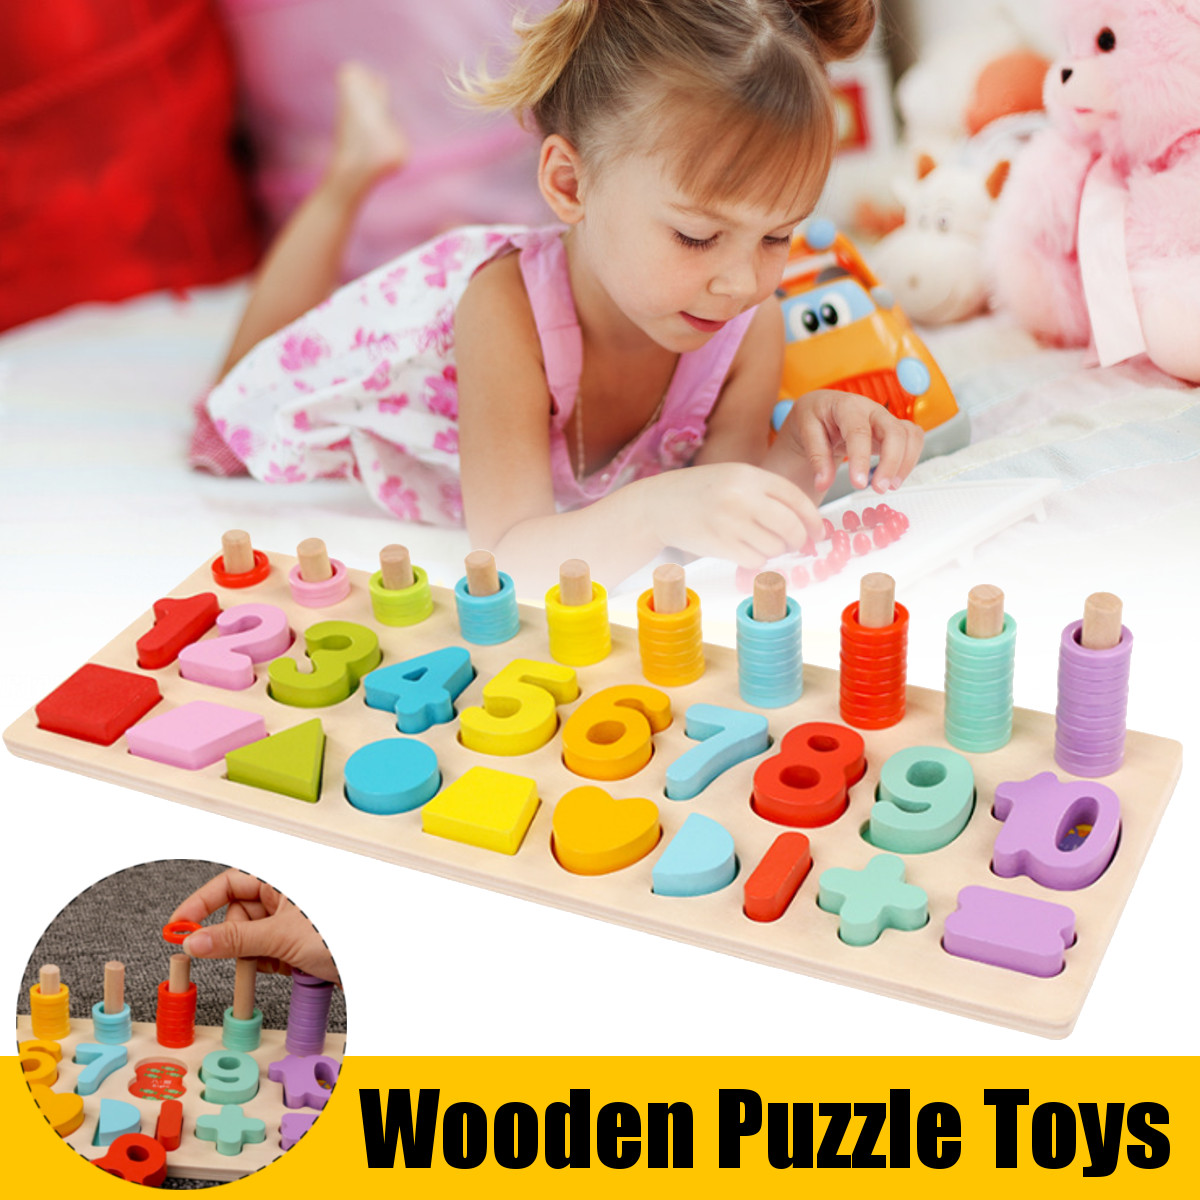 Kids-Wooden-Math-Puzzle-Toys-Numbers-Learning-Hand-Eye-Coordination-Educational-Games-1665813-1